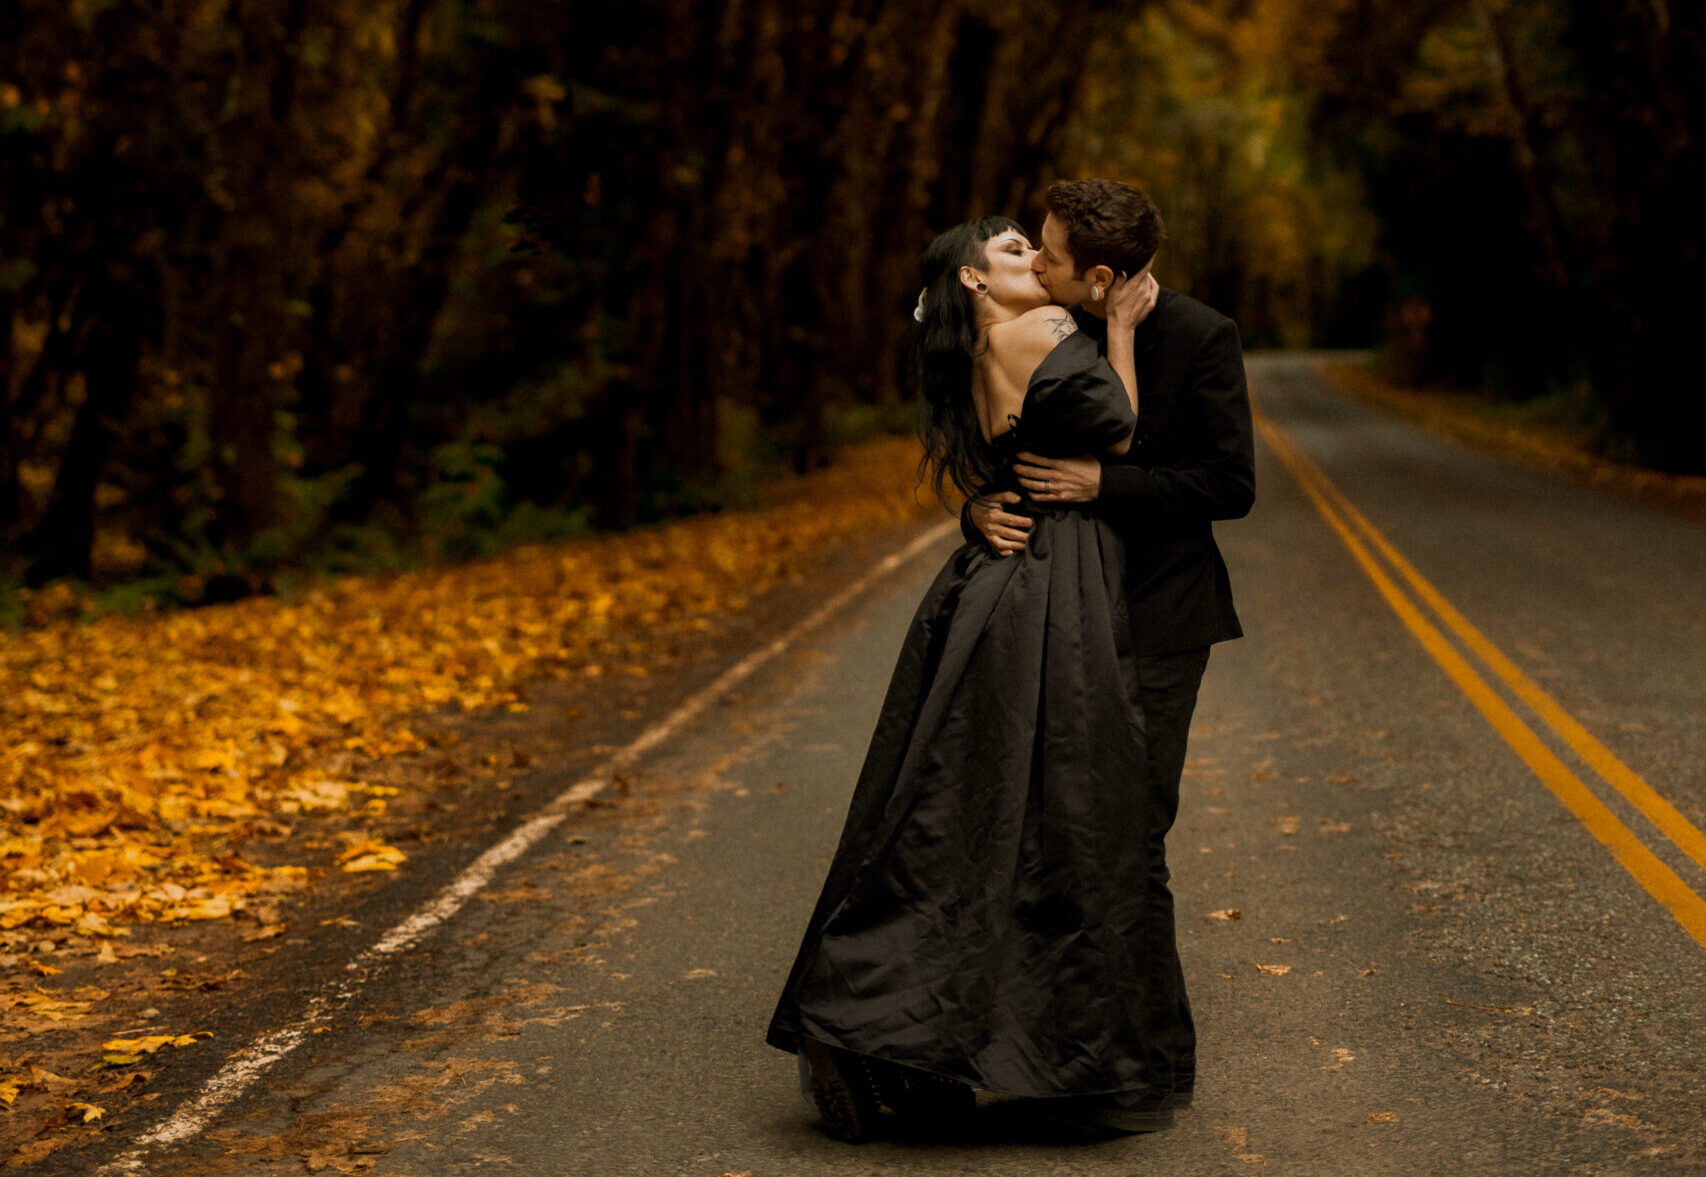 A newly eloped couple wearing all black shares a dip kiss on a fall road in the Hoh Rainforest.